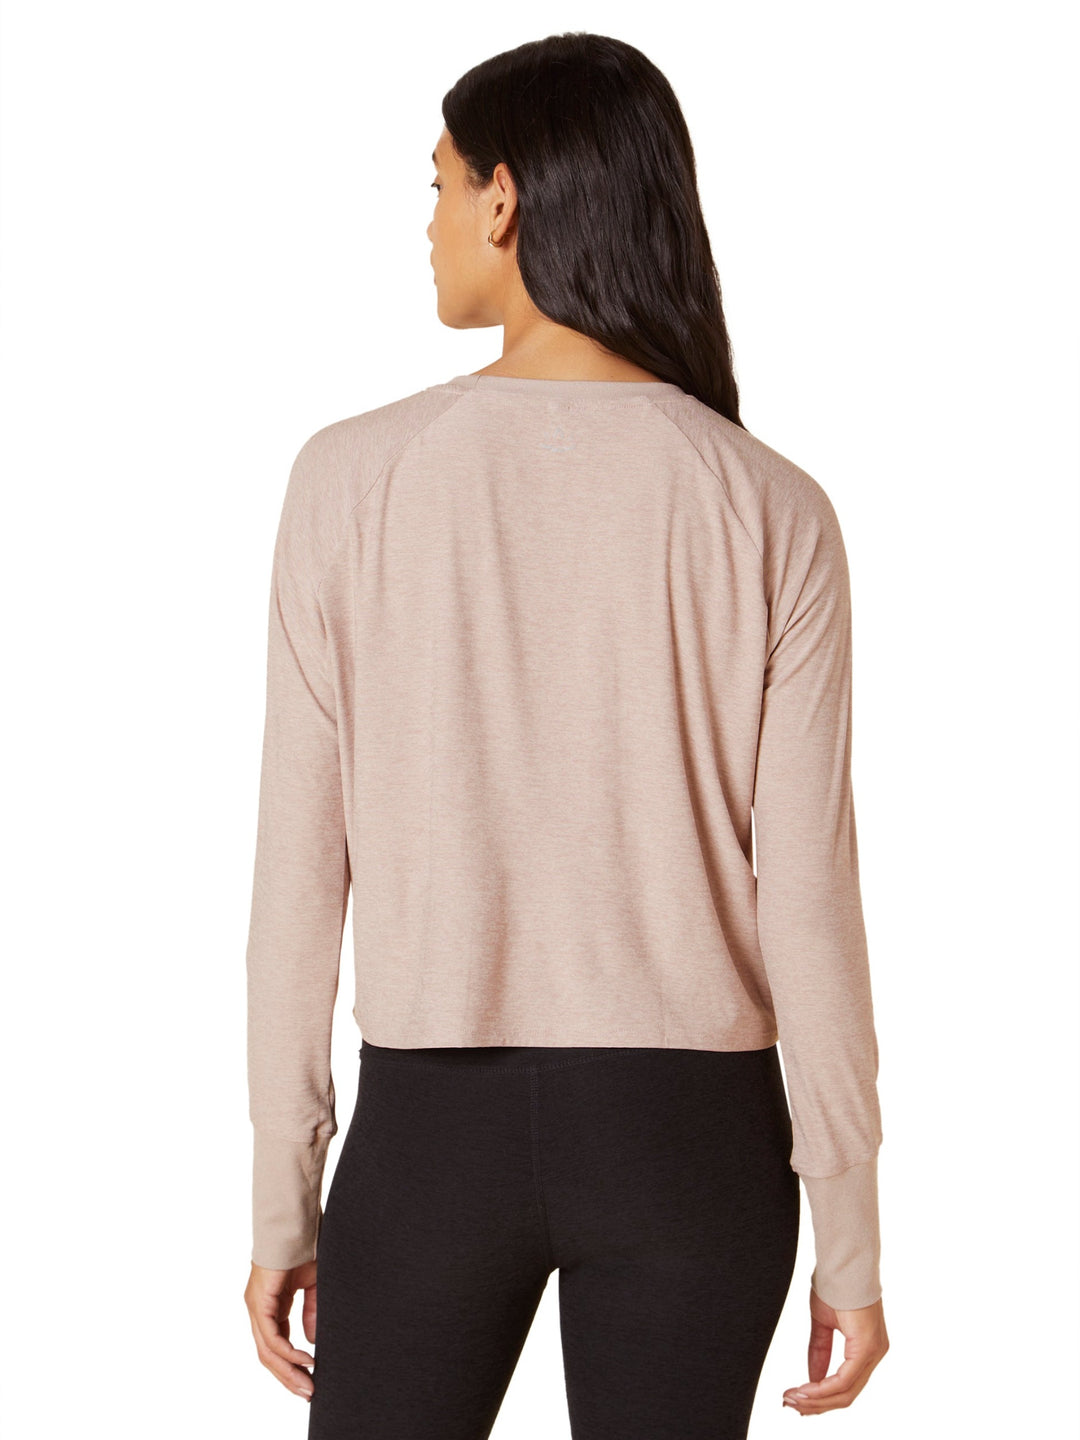 Beyond Yoga Afternoon Light Pullover